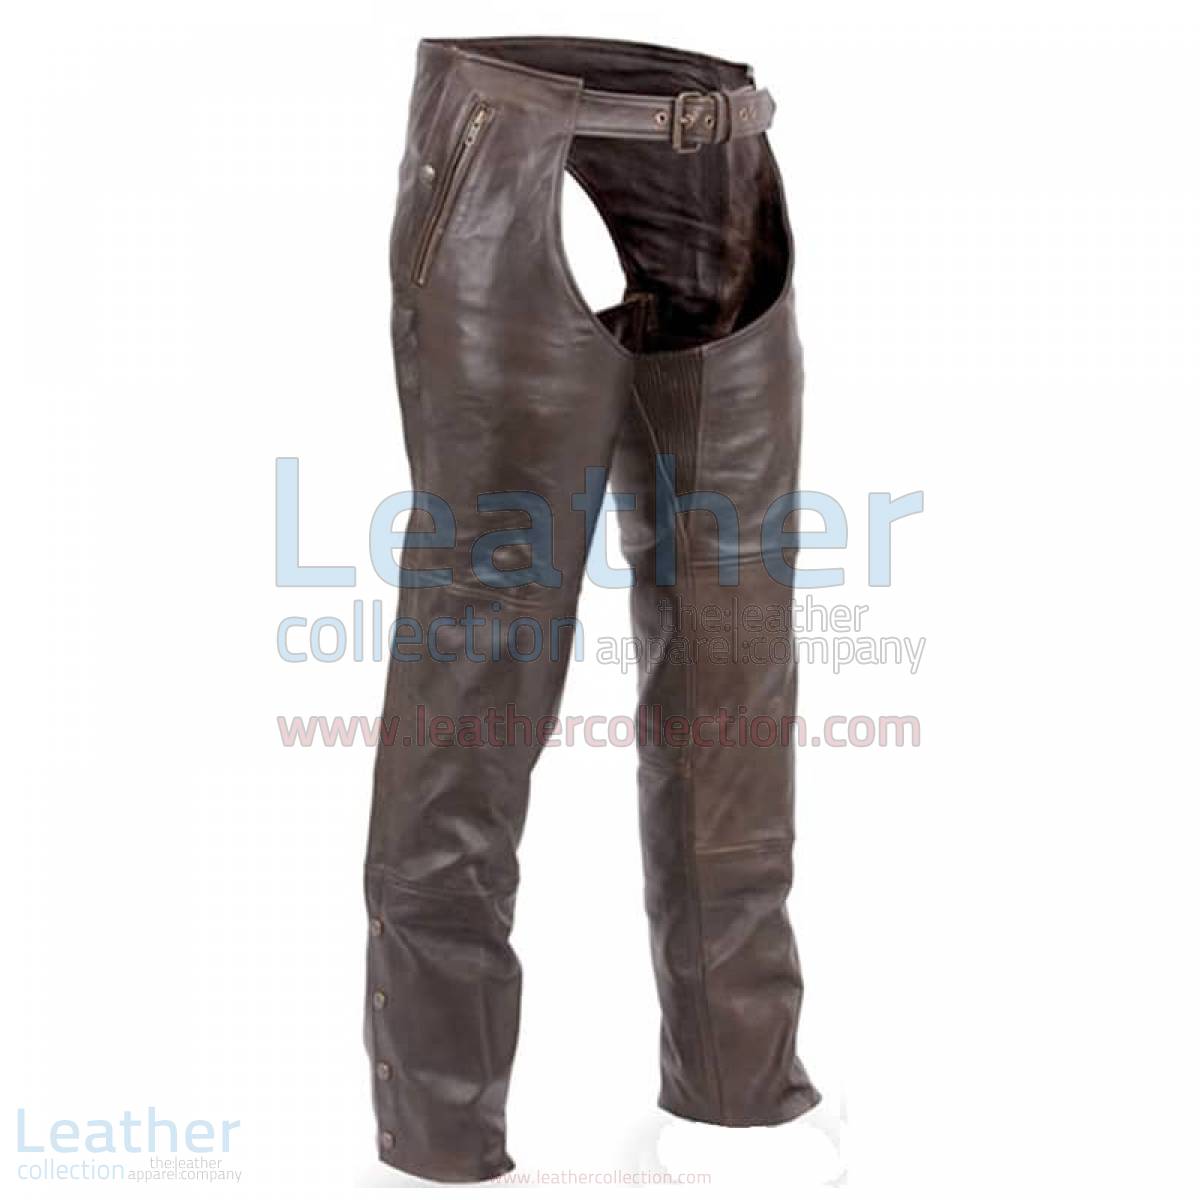 Premium Brown Leather Motorcycle Chaps